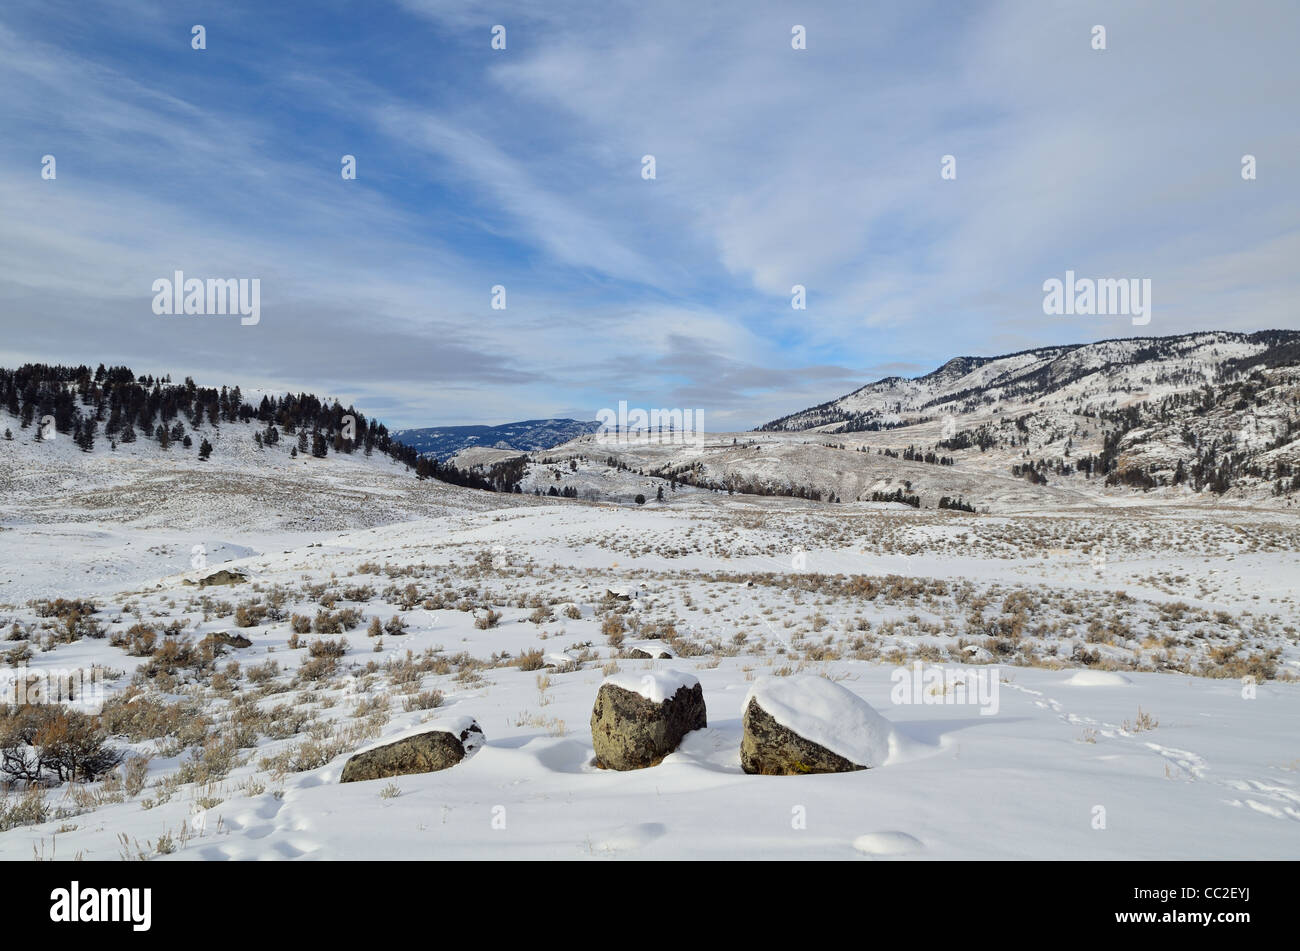 Snow covered landscape of Lamar Valley, Yellowstone National Park, Montana, USA. Stock Photo